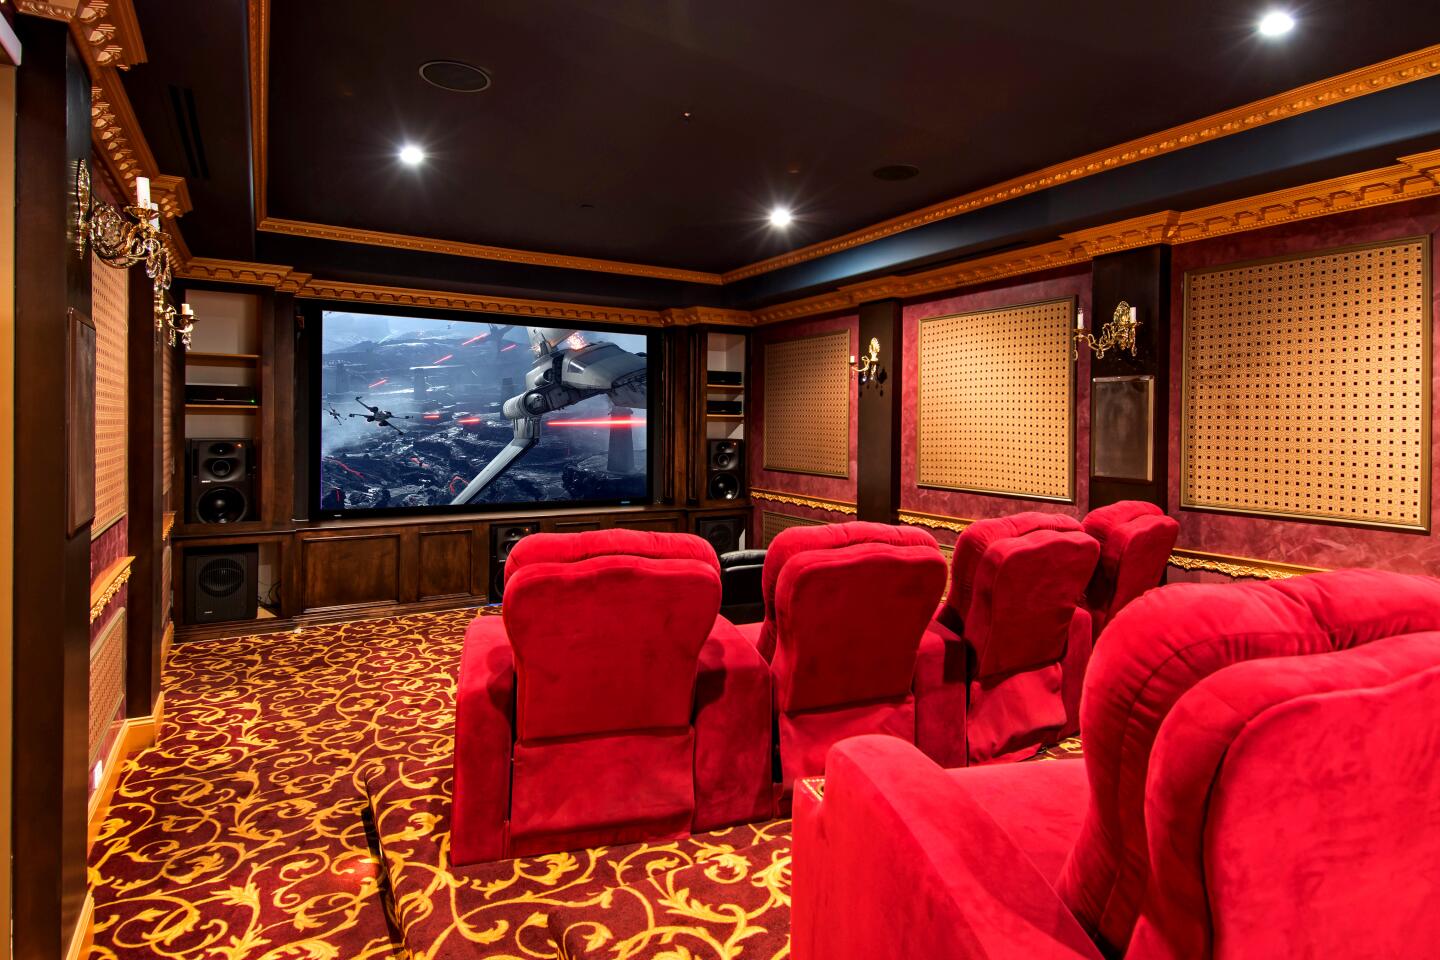 The mansion has a movie theater.